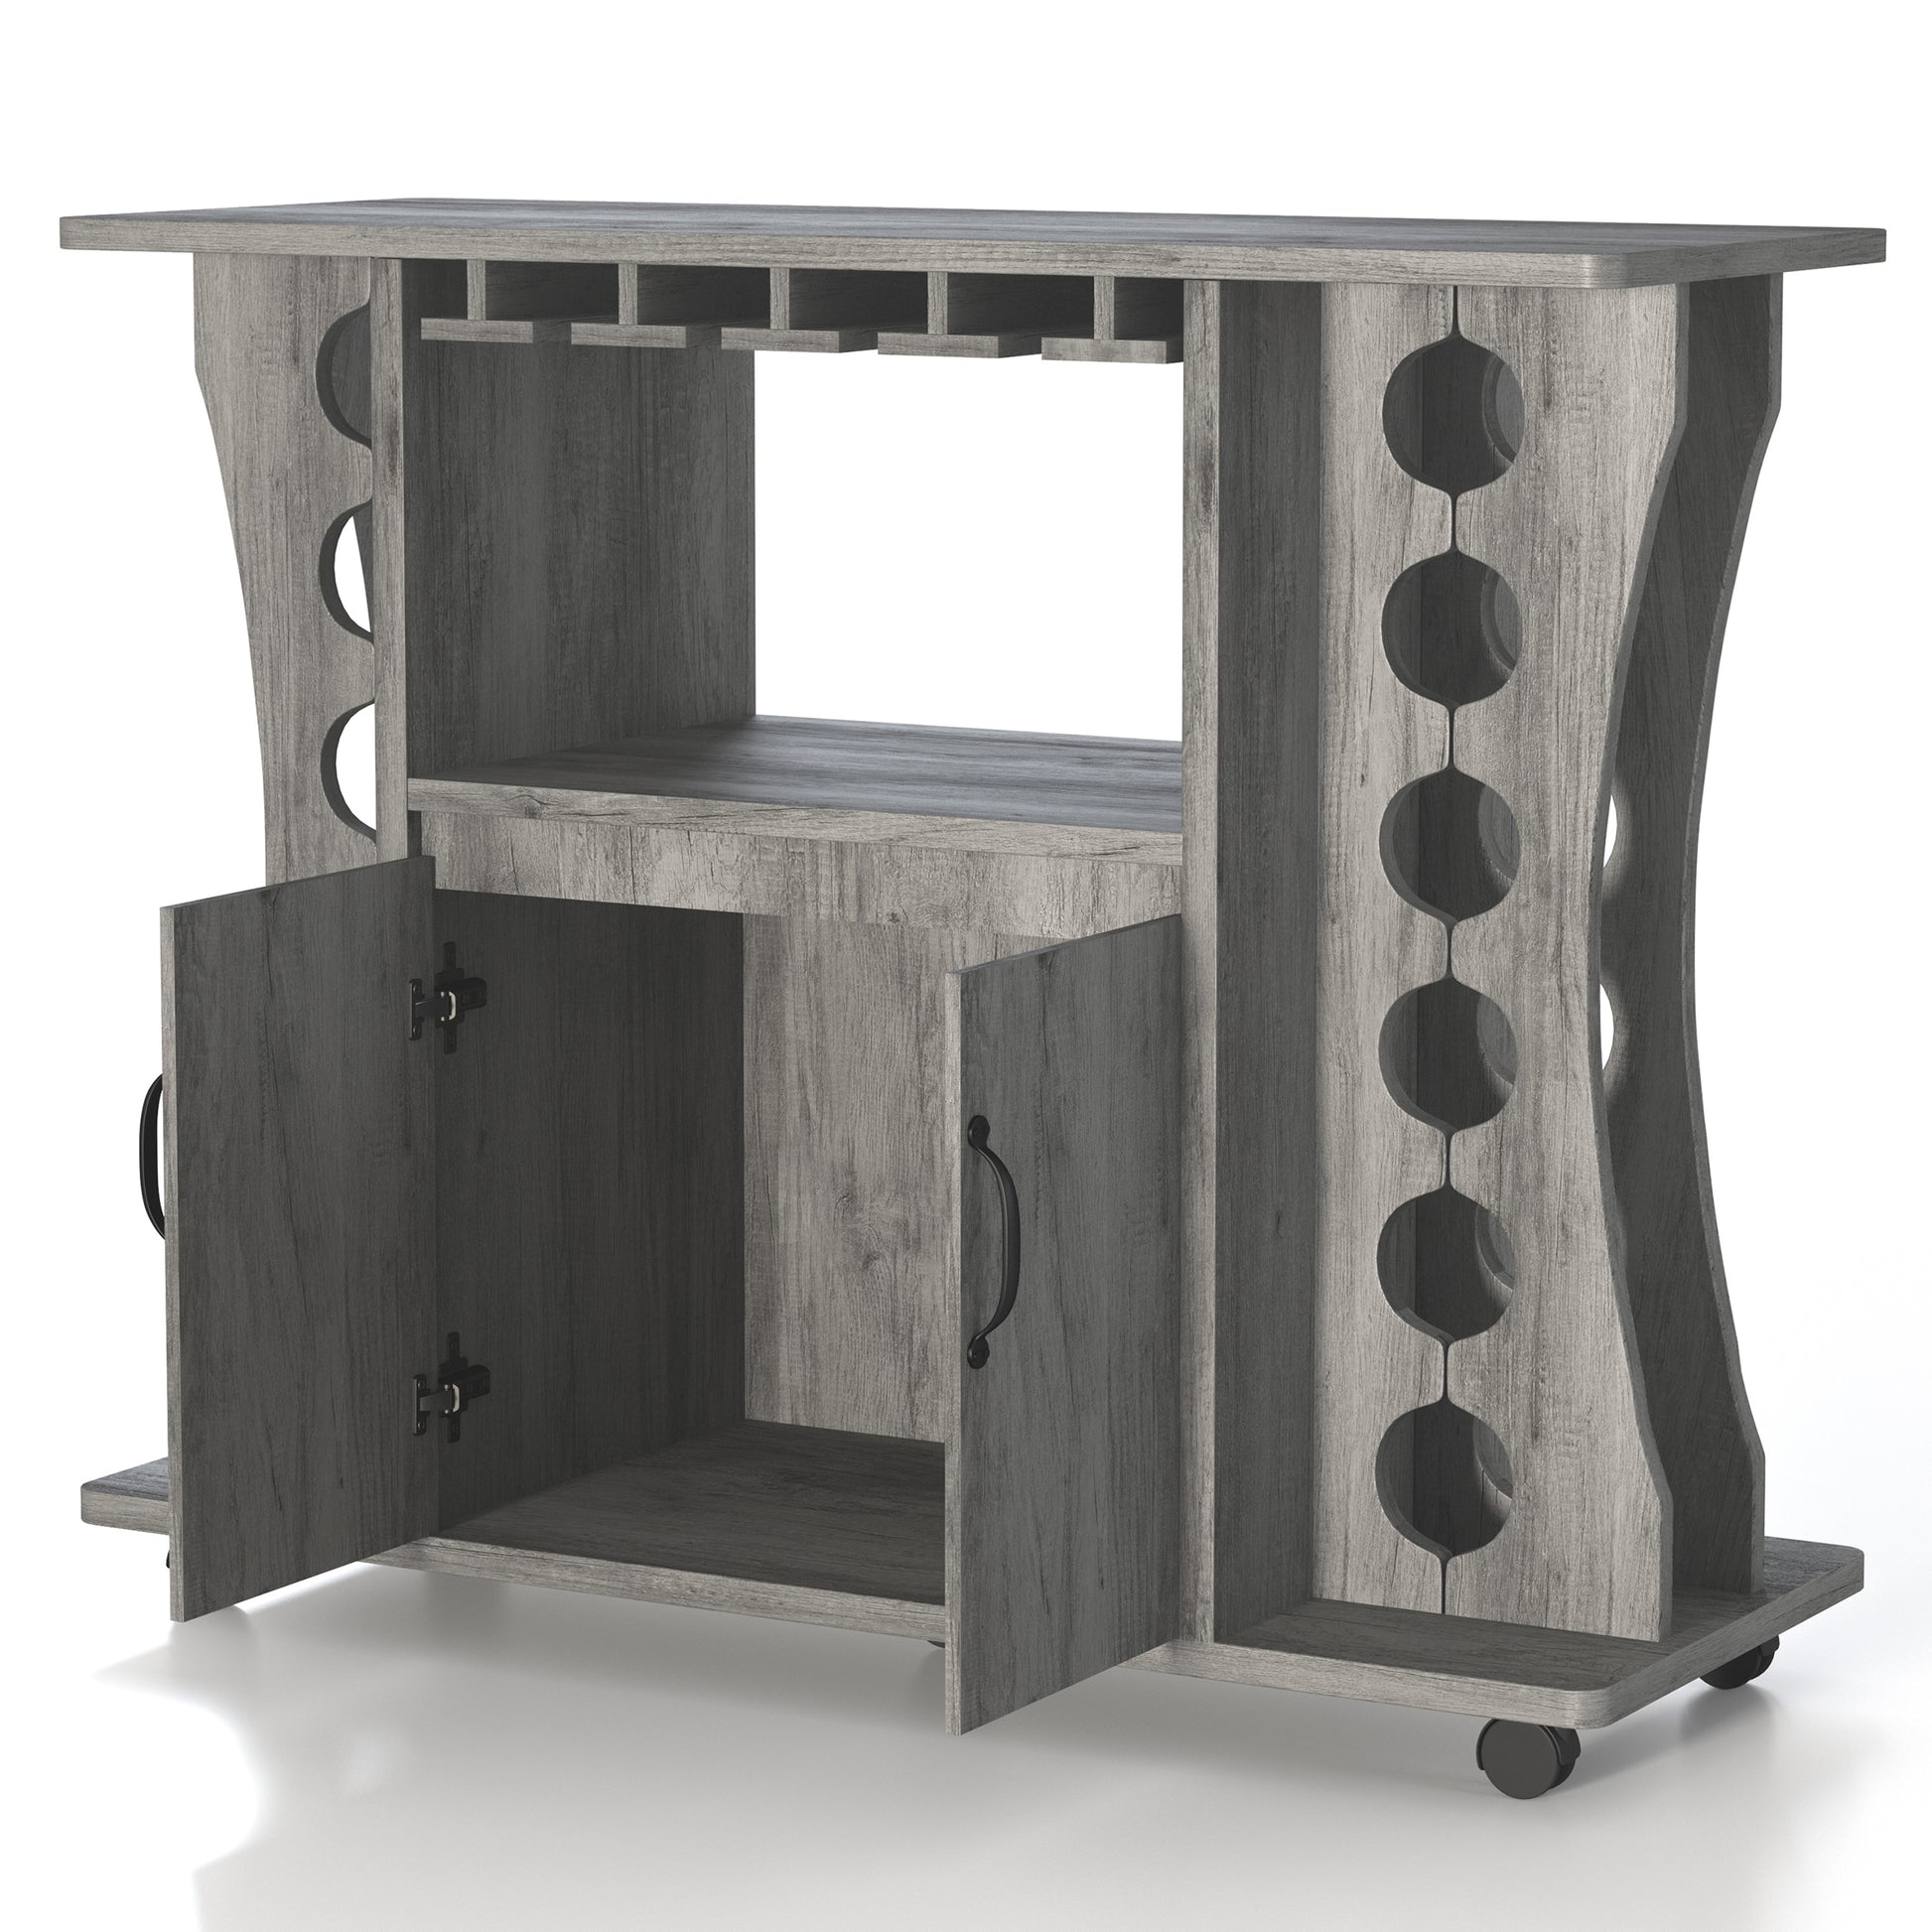 Left angled transitional vintage gray oak two-door mobile bar table with bottle and stemware racks and doors open on a white background